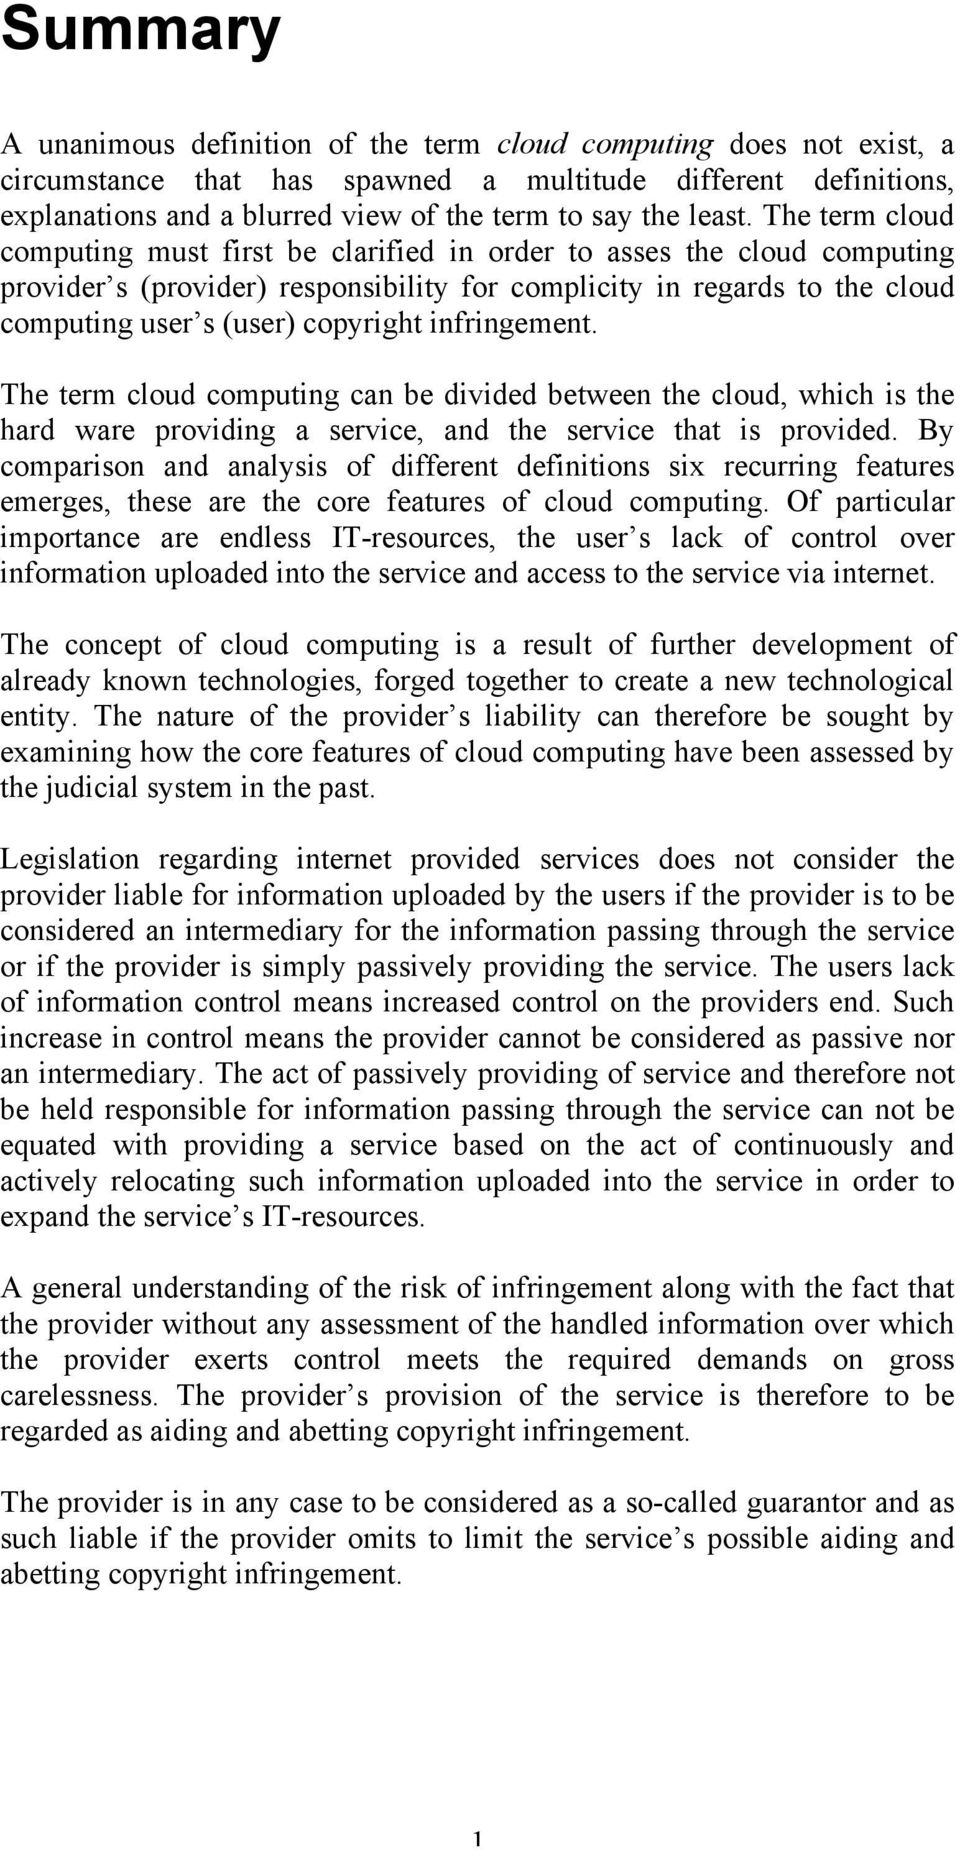 The term cloud computing must first be clarified in order to asses the cloud computing provider s (provider) responsibility for complicity in regards to the cloud computing user s (user) copyright